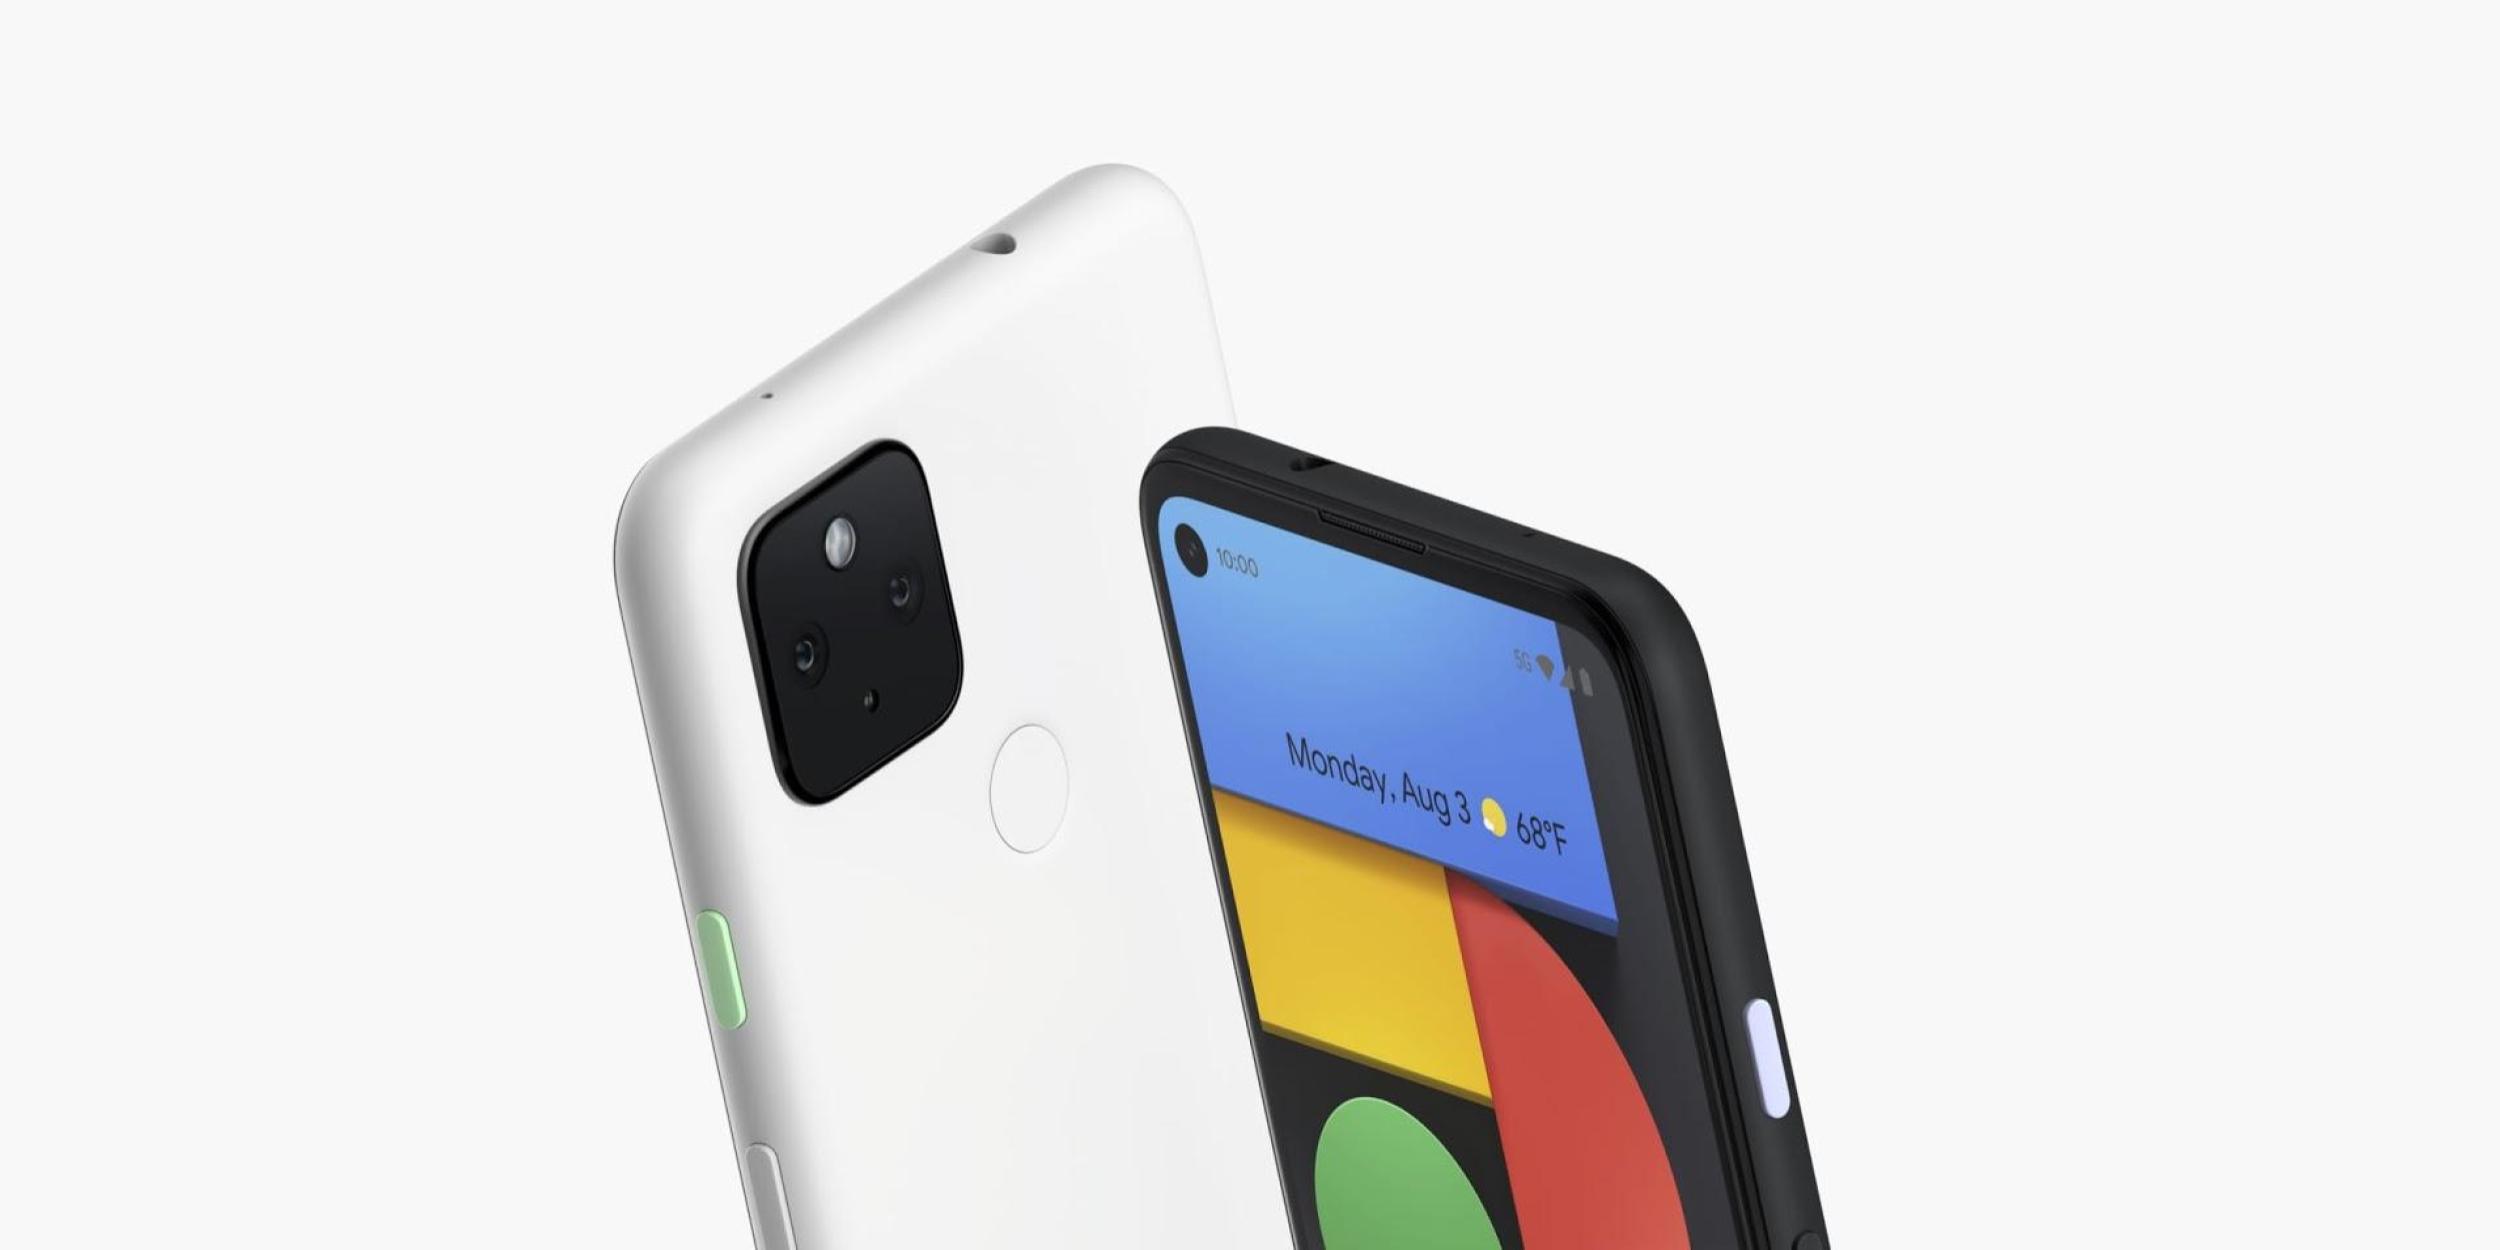 Google pixel 4a 5G clearly white